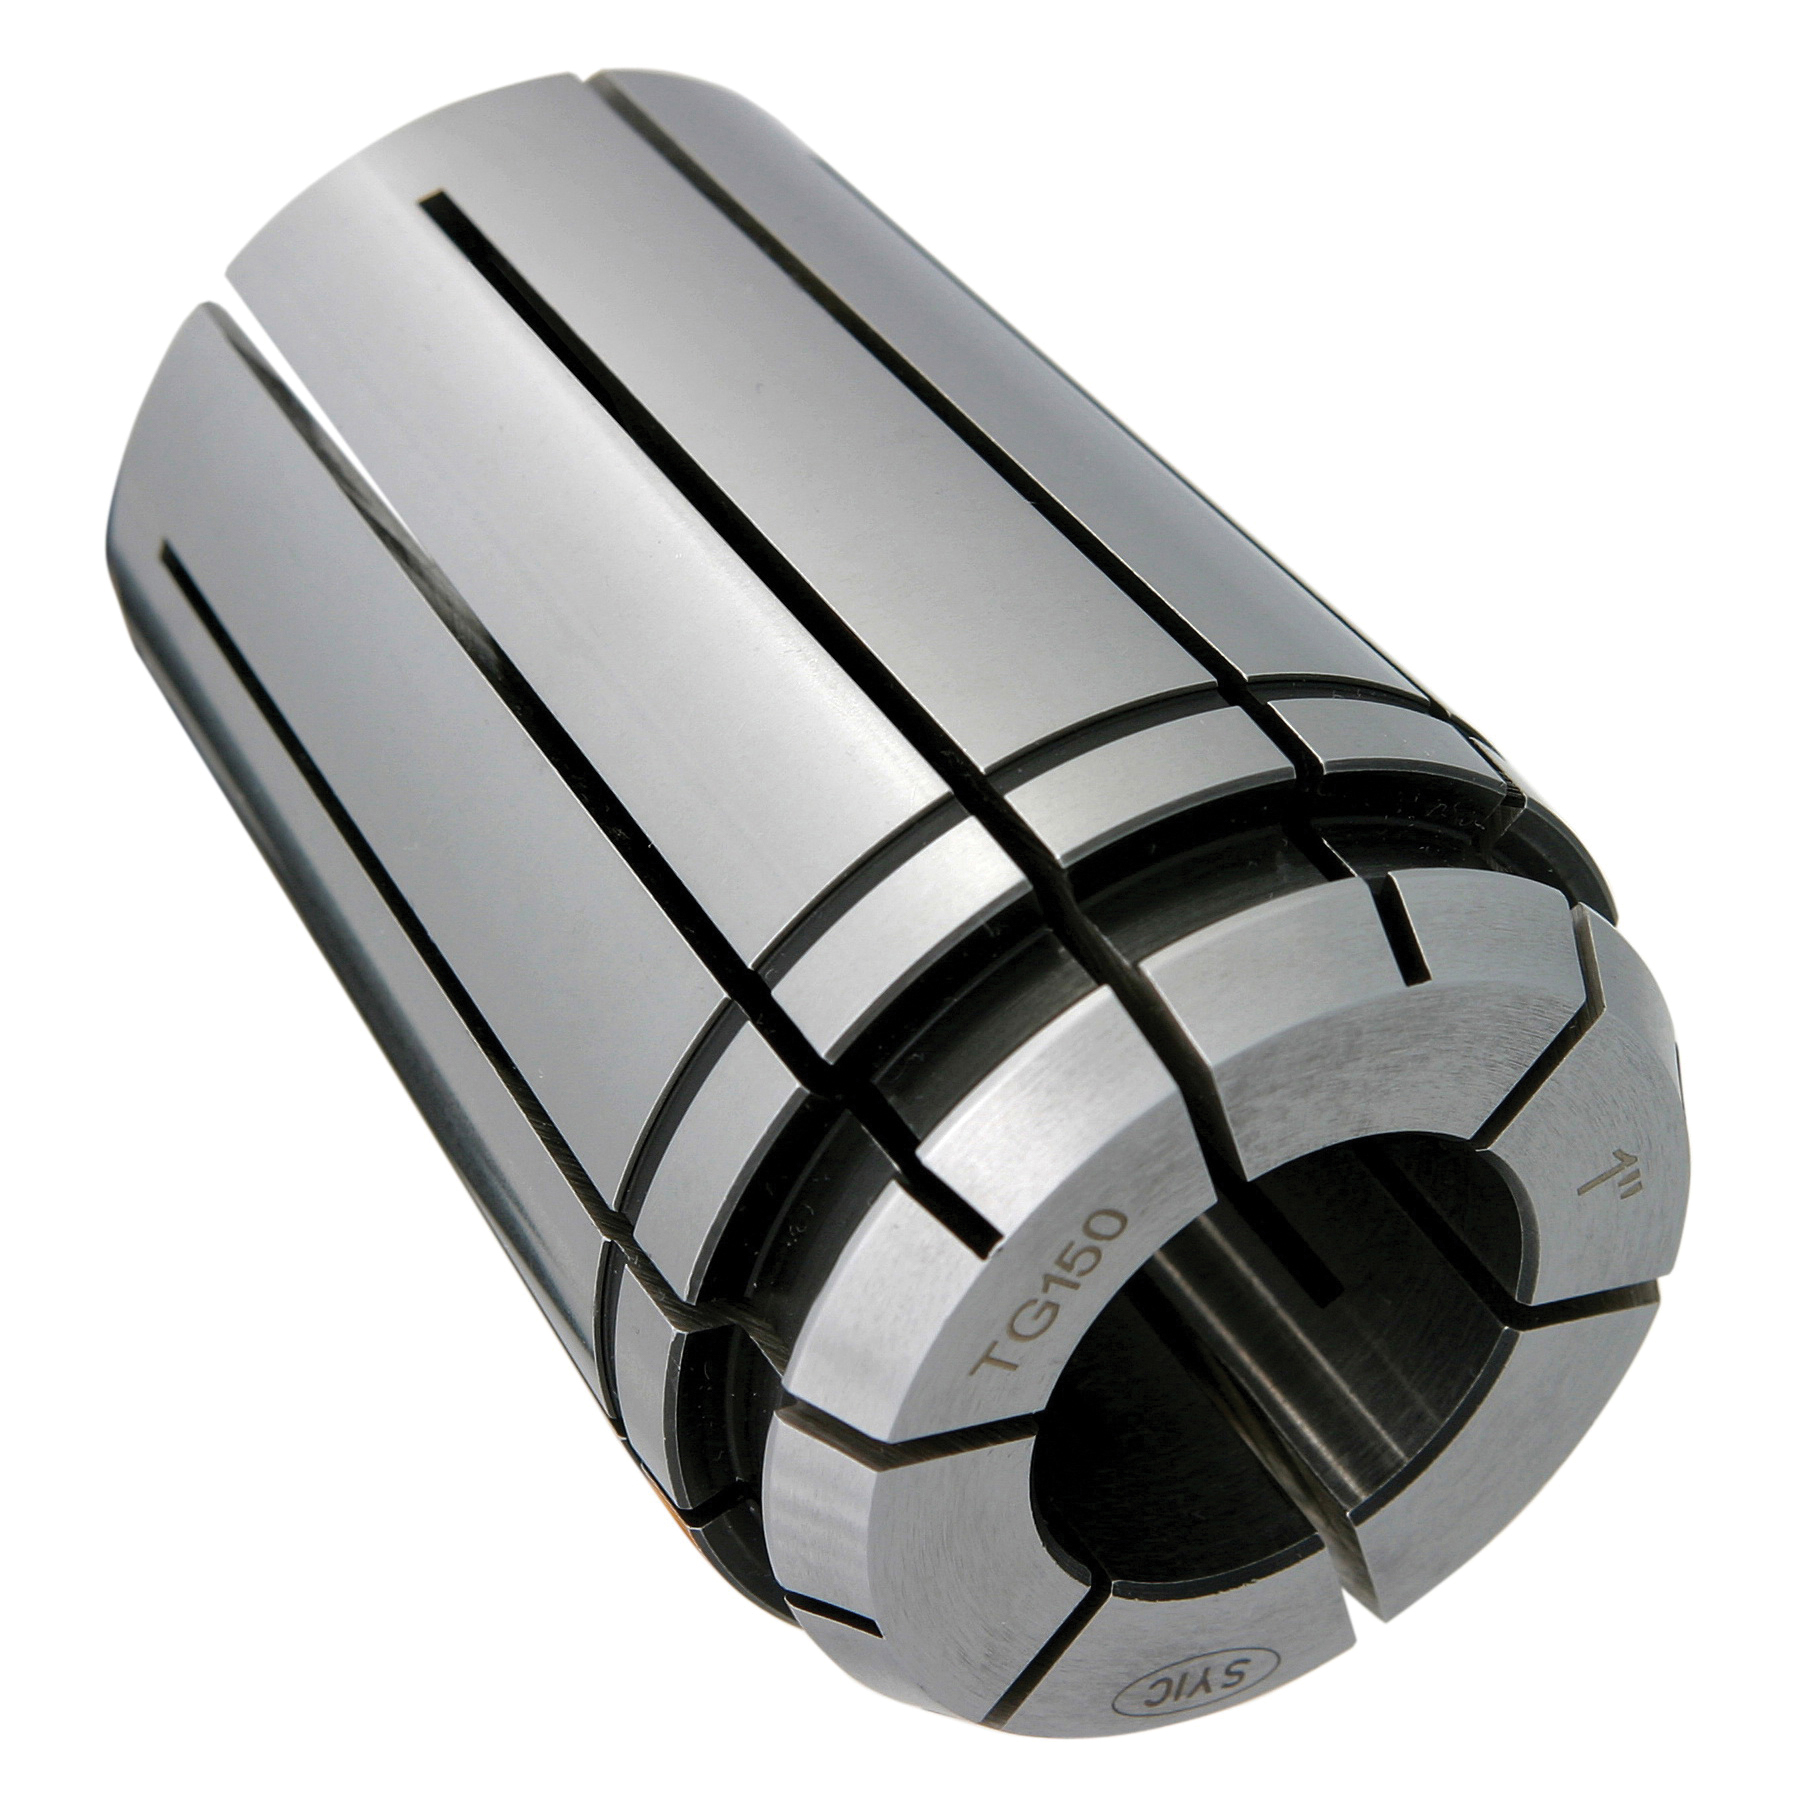 TG150 1-13/64" COLLET